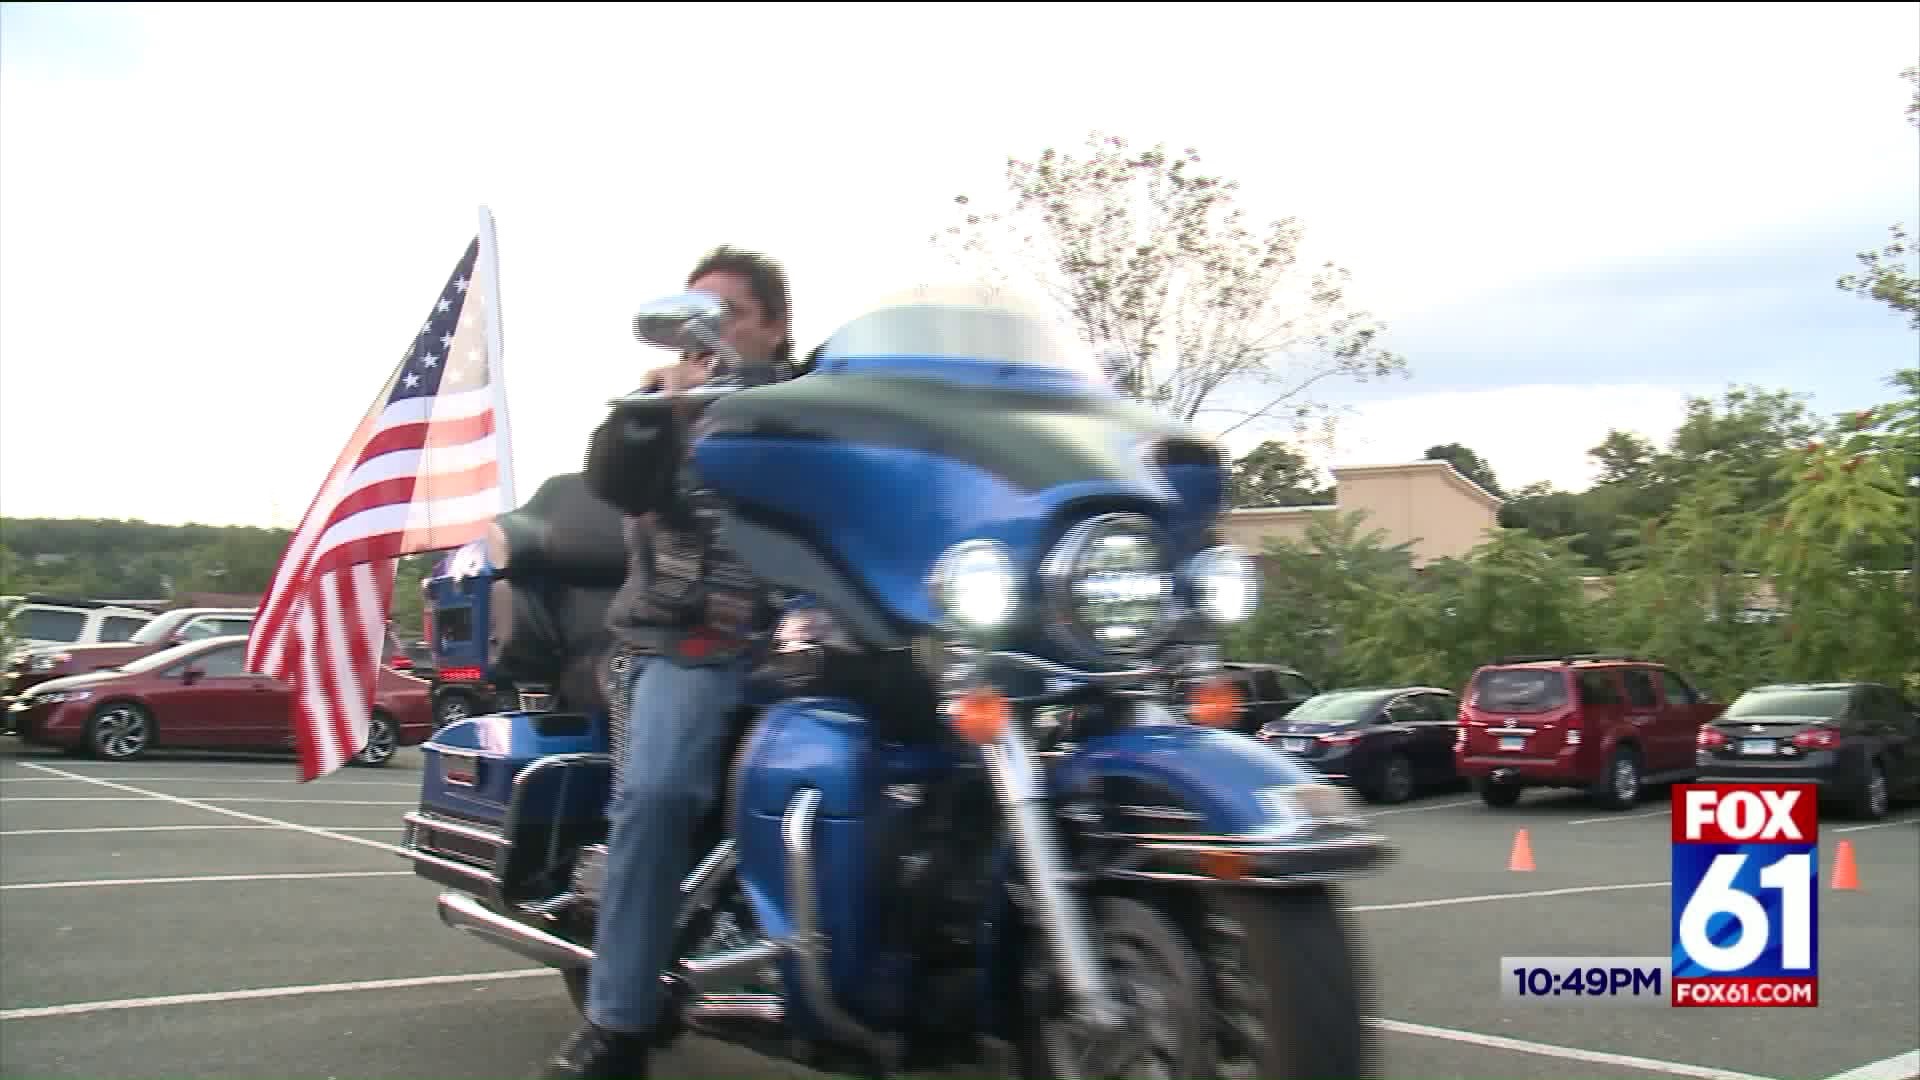 Bike night held in Derby all for a good cause